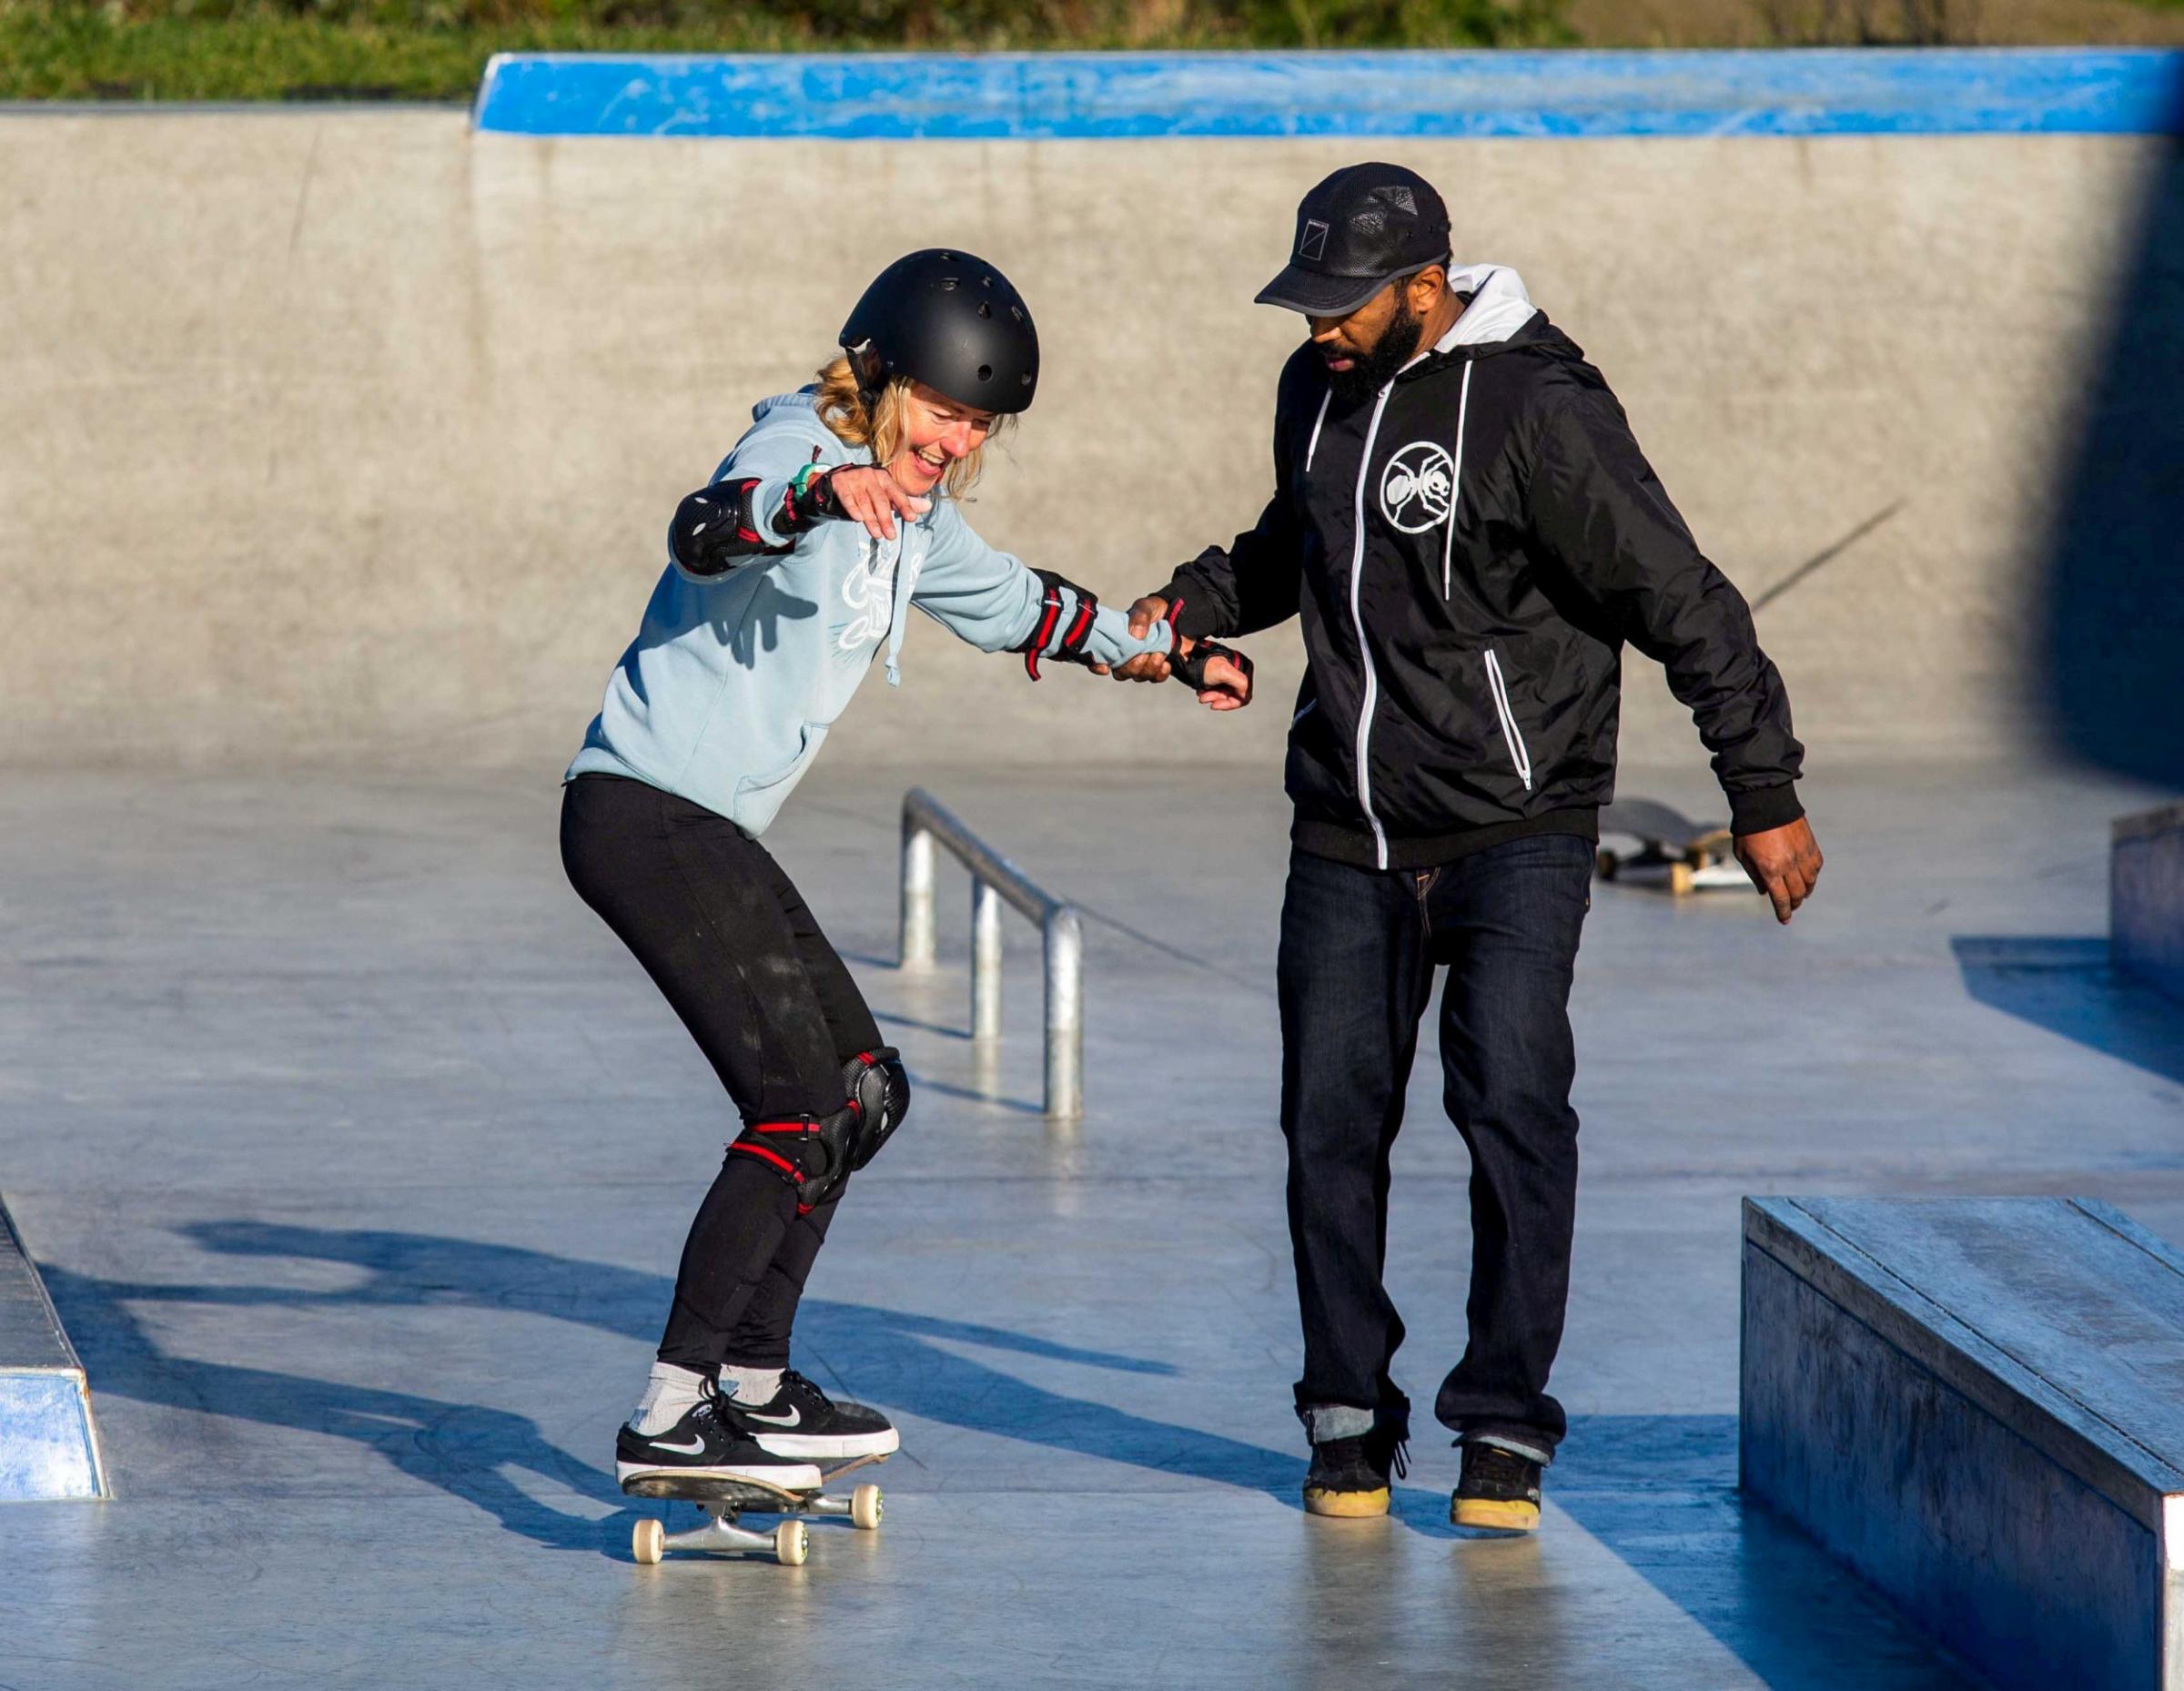 Coach Zain Ishmael helps Lisa Woodruff at the Mount Hawke Skate Park Picture: SWNS